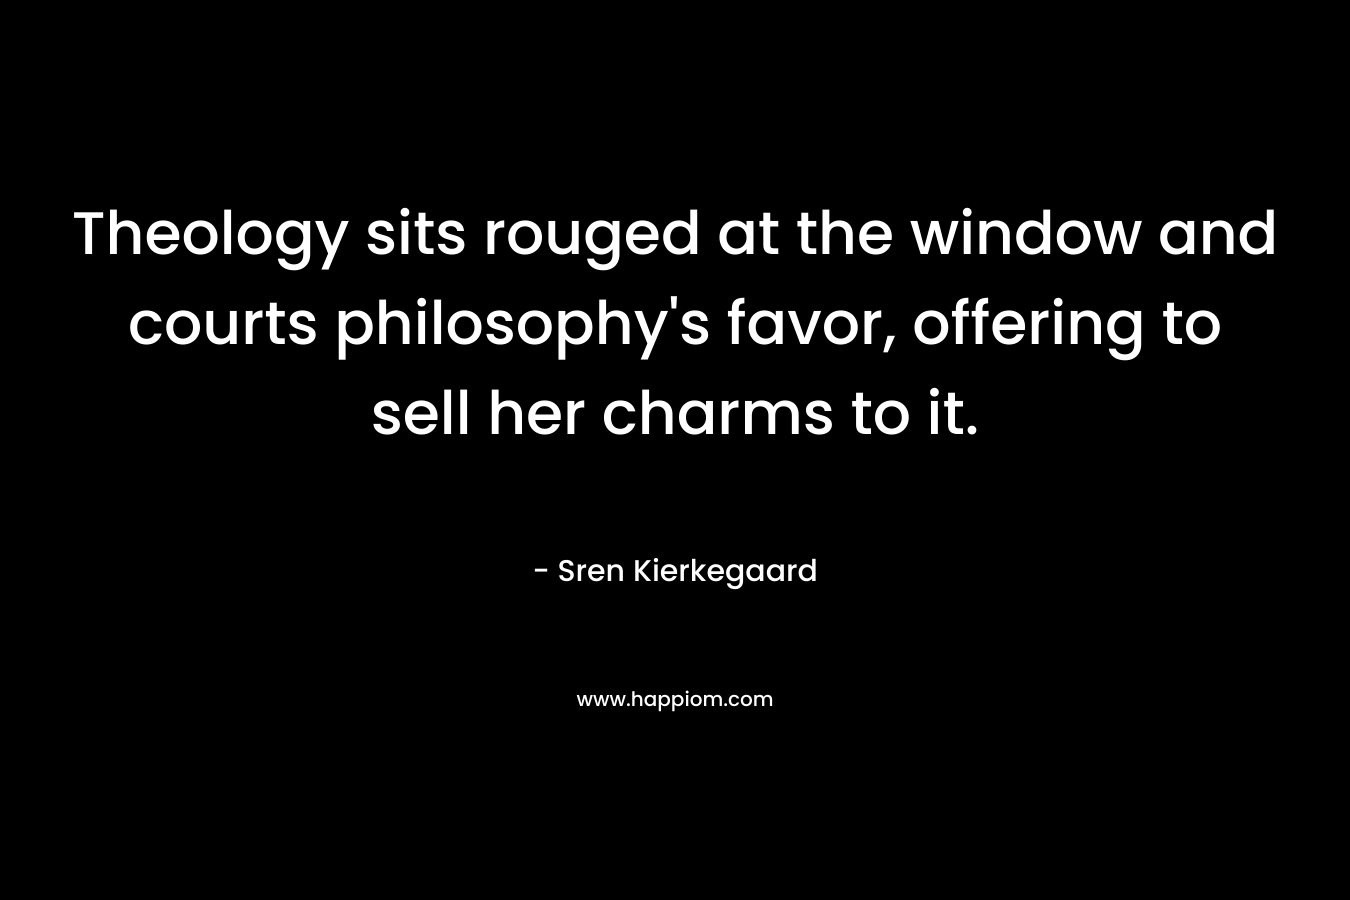 Theology sits rouged at the window and courts philosophy’s favor, offering to sell her charms to it. – Sren Kierkegaard